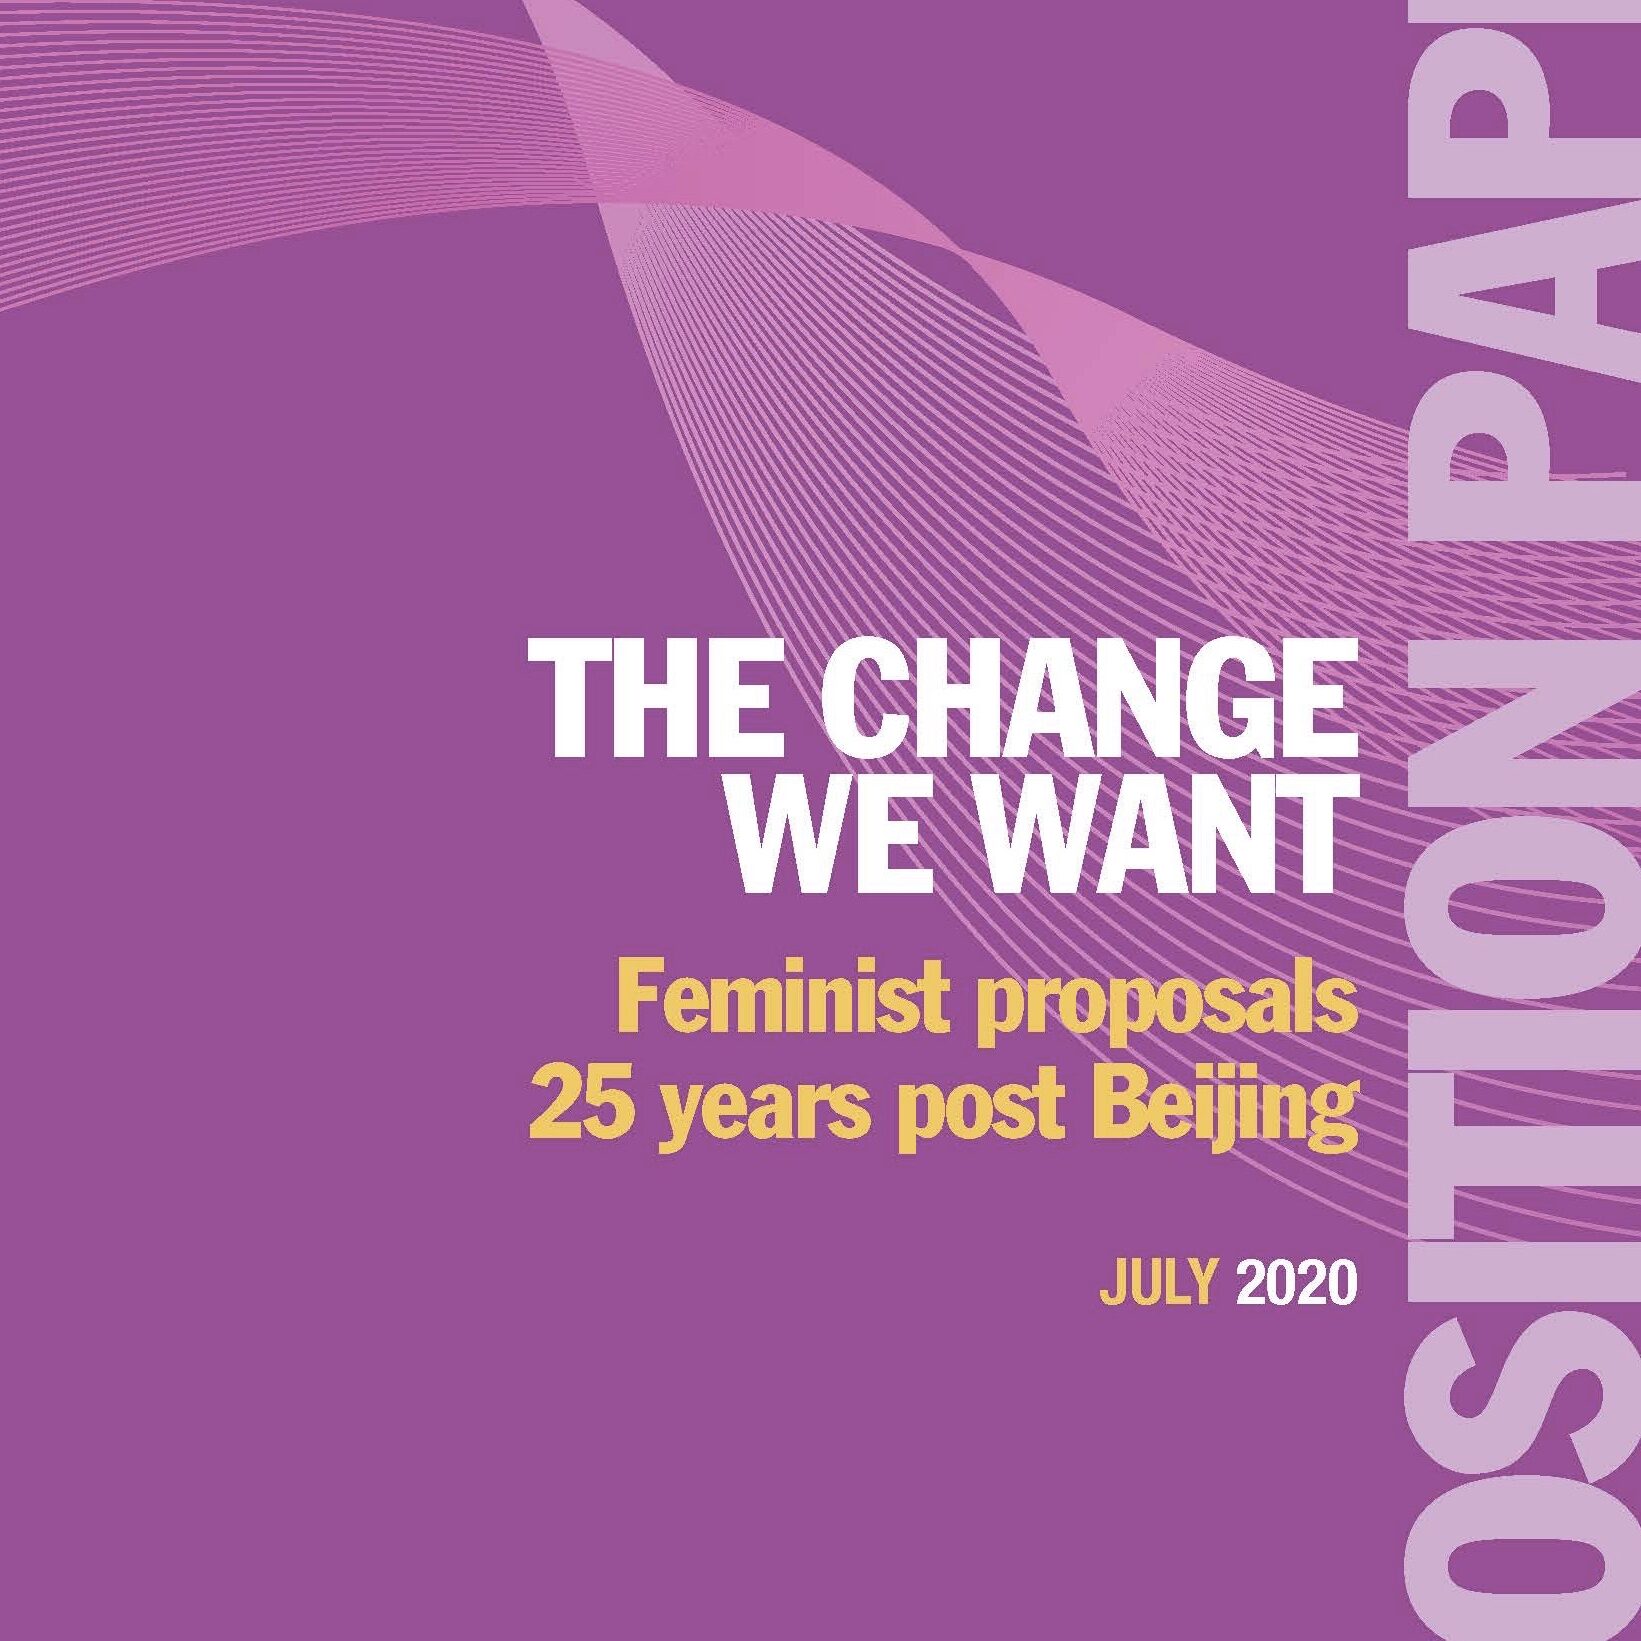 Position Paper The change we want. Feminist proposals 25 years post Beijing